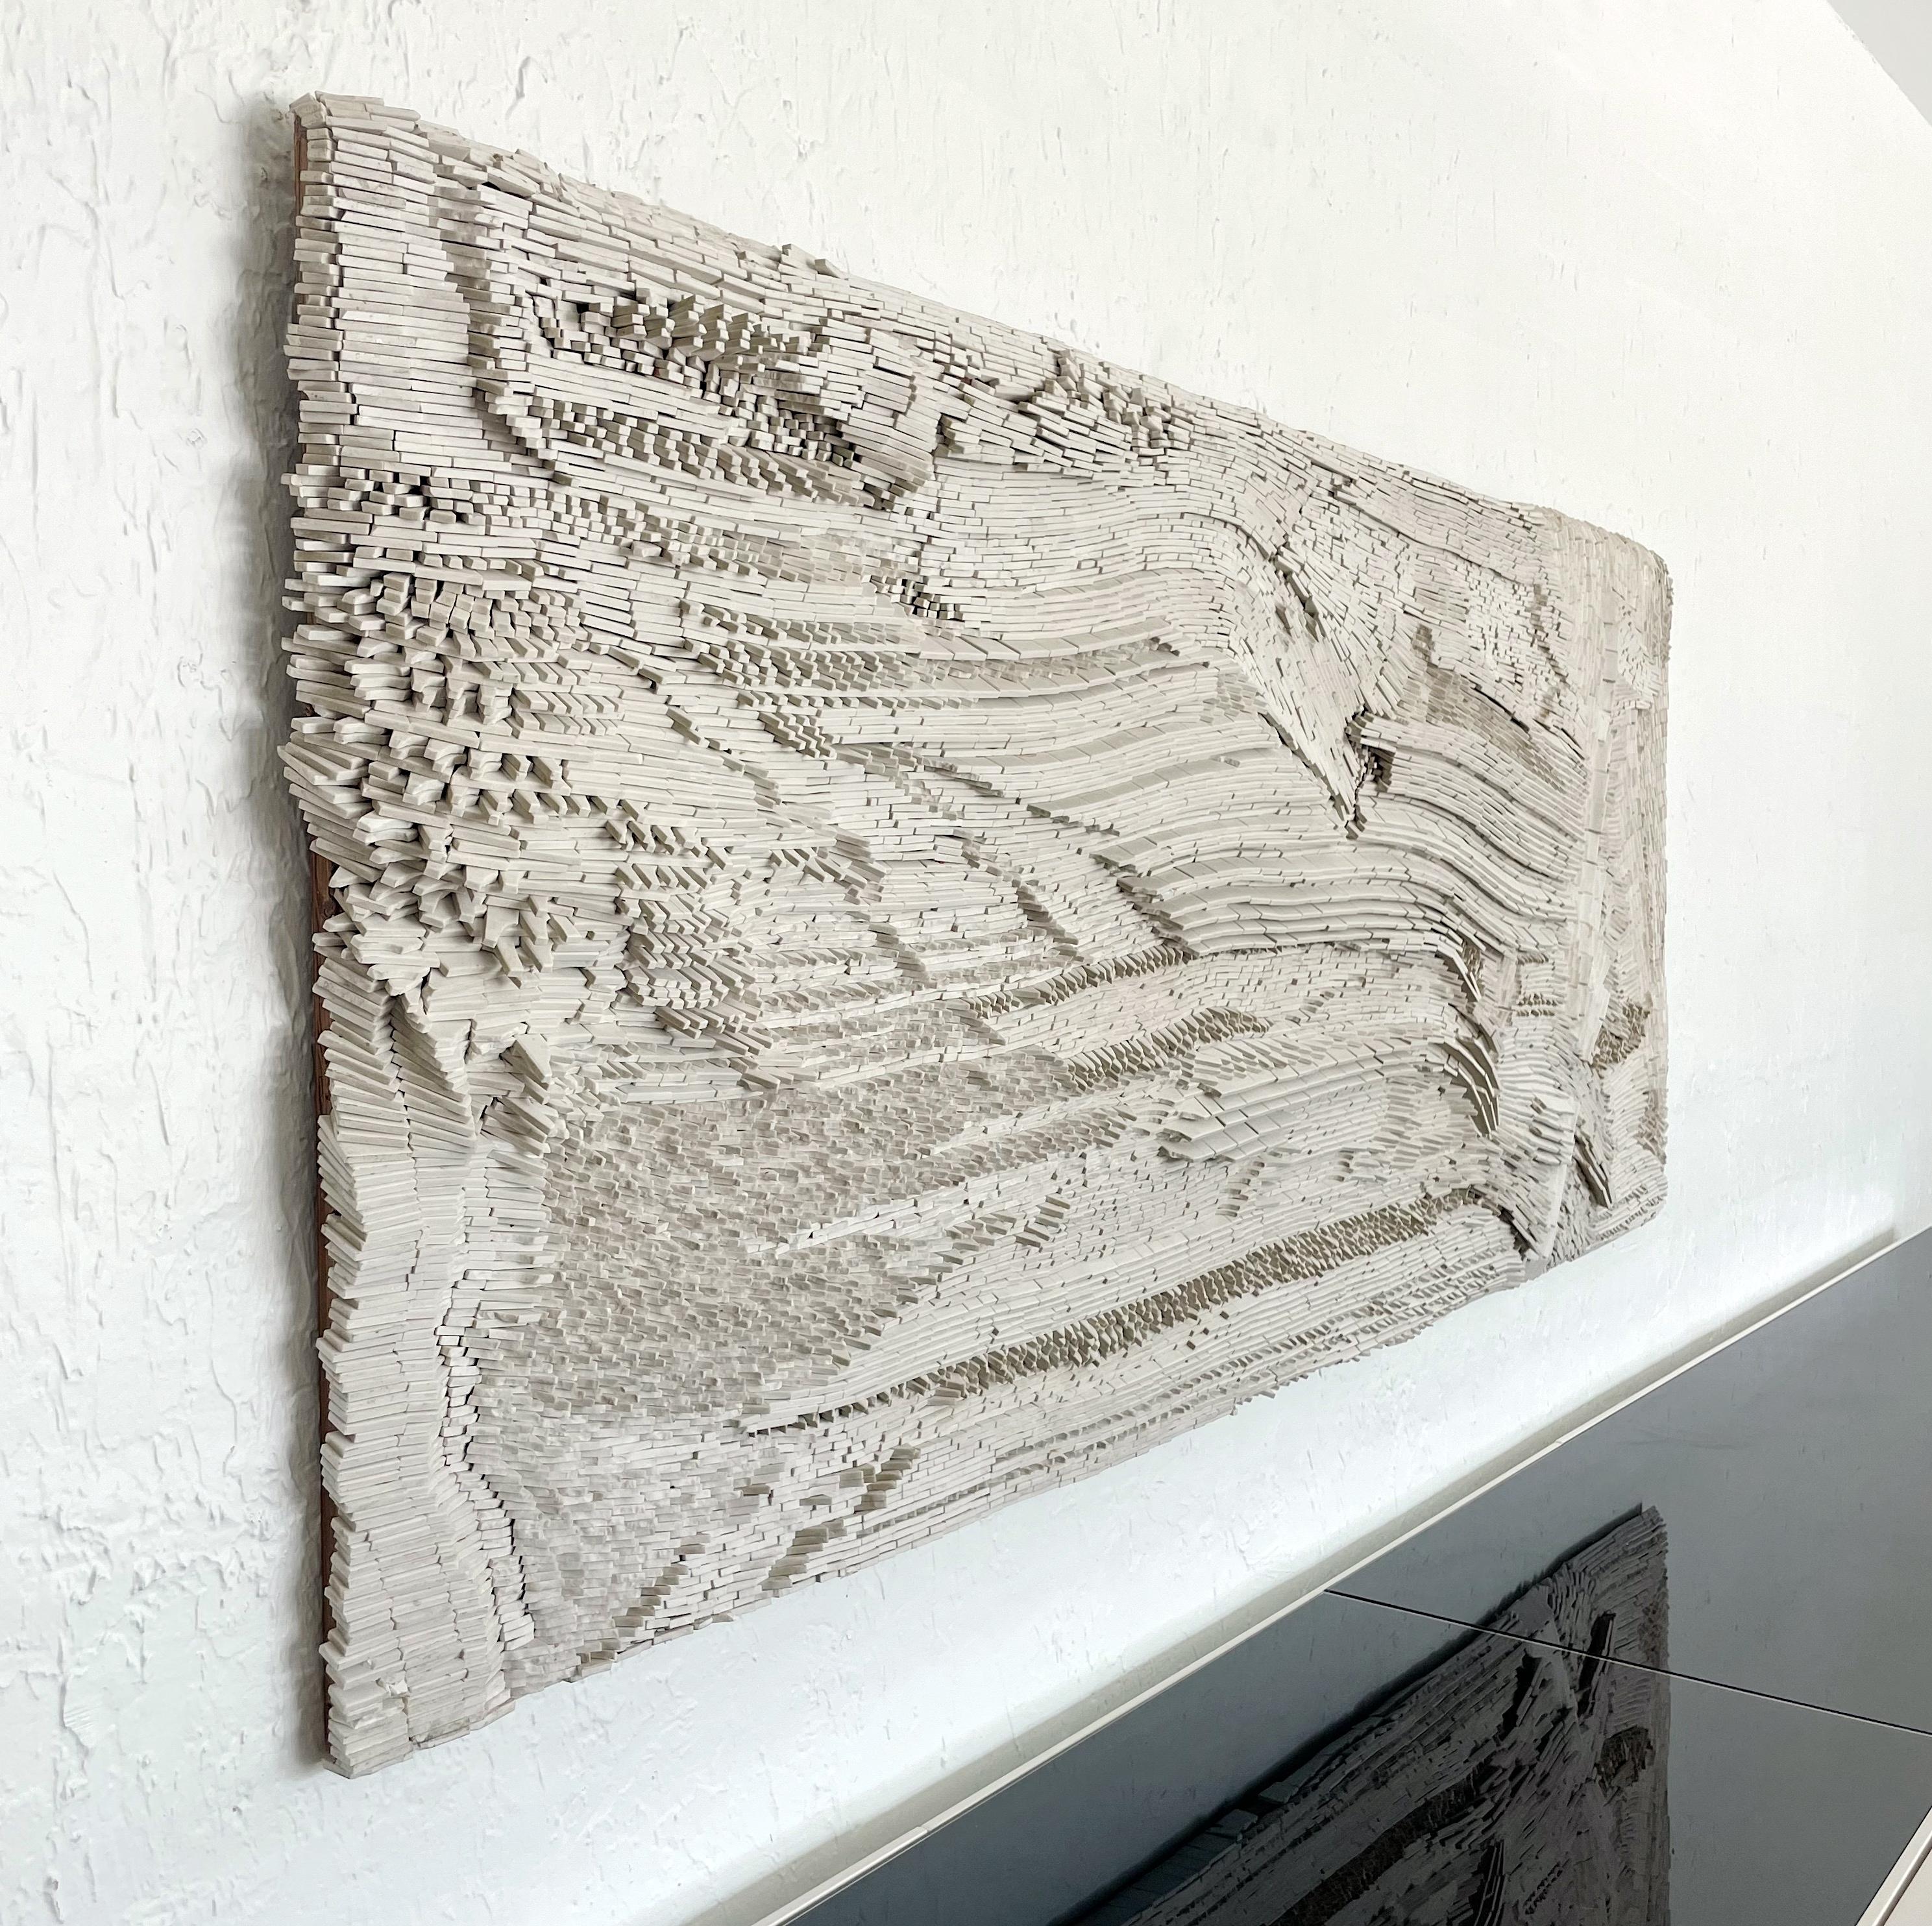 Monumental stone wall sculpture varying shades of white by Cranbrook artist Glen Michaels. Michaels was influenced by the landscape of the Pacific Northwest, His work usually featured jagged tiles that echoed these rock formations. We spoke with